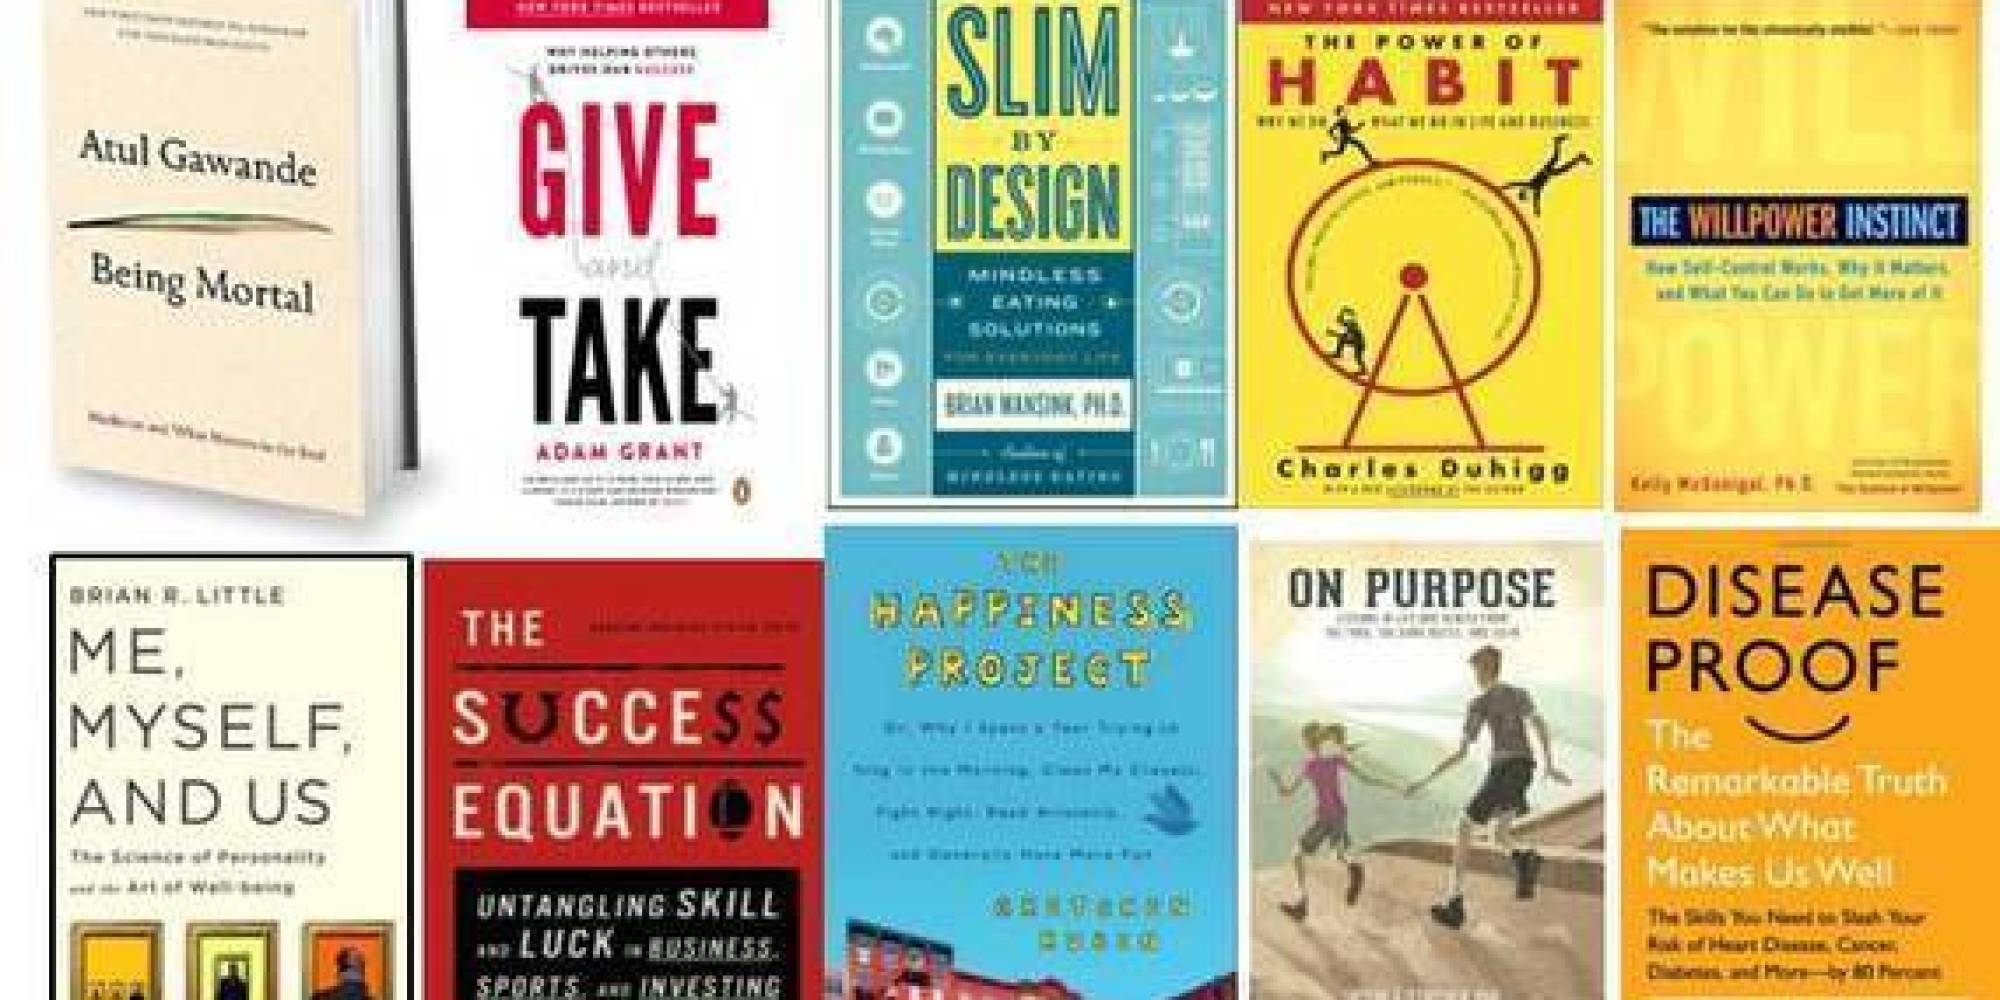 The 10 Best Health Books in 2014 | HuffPost